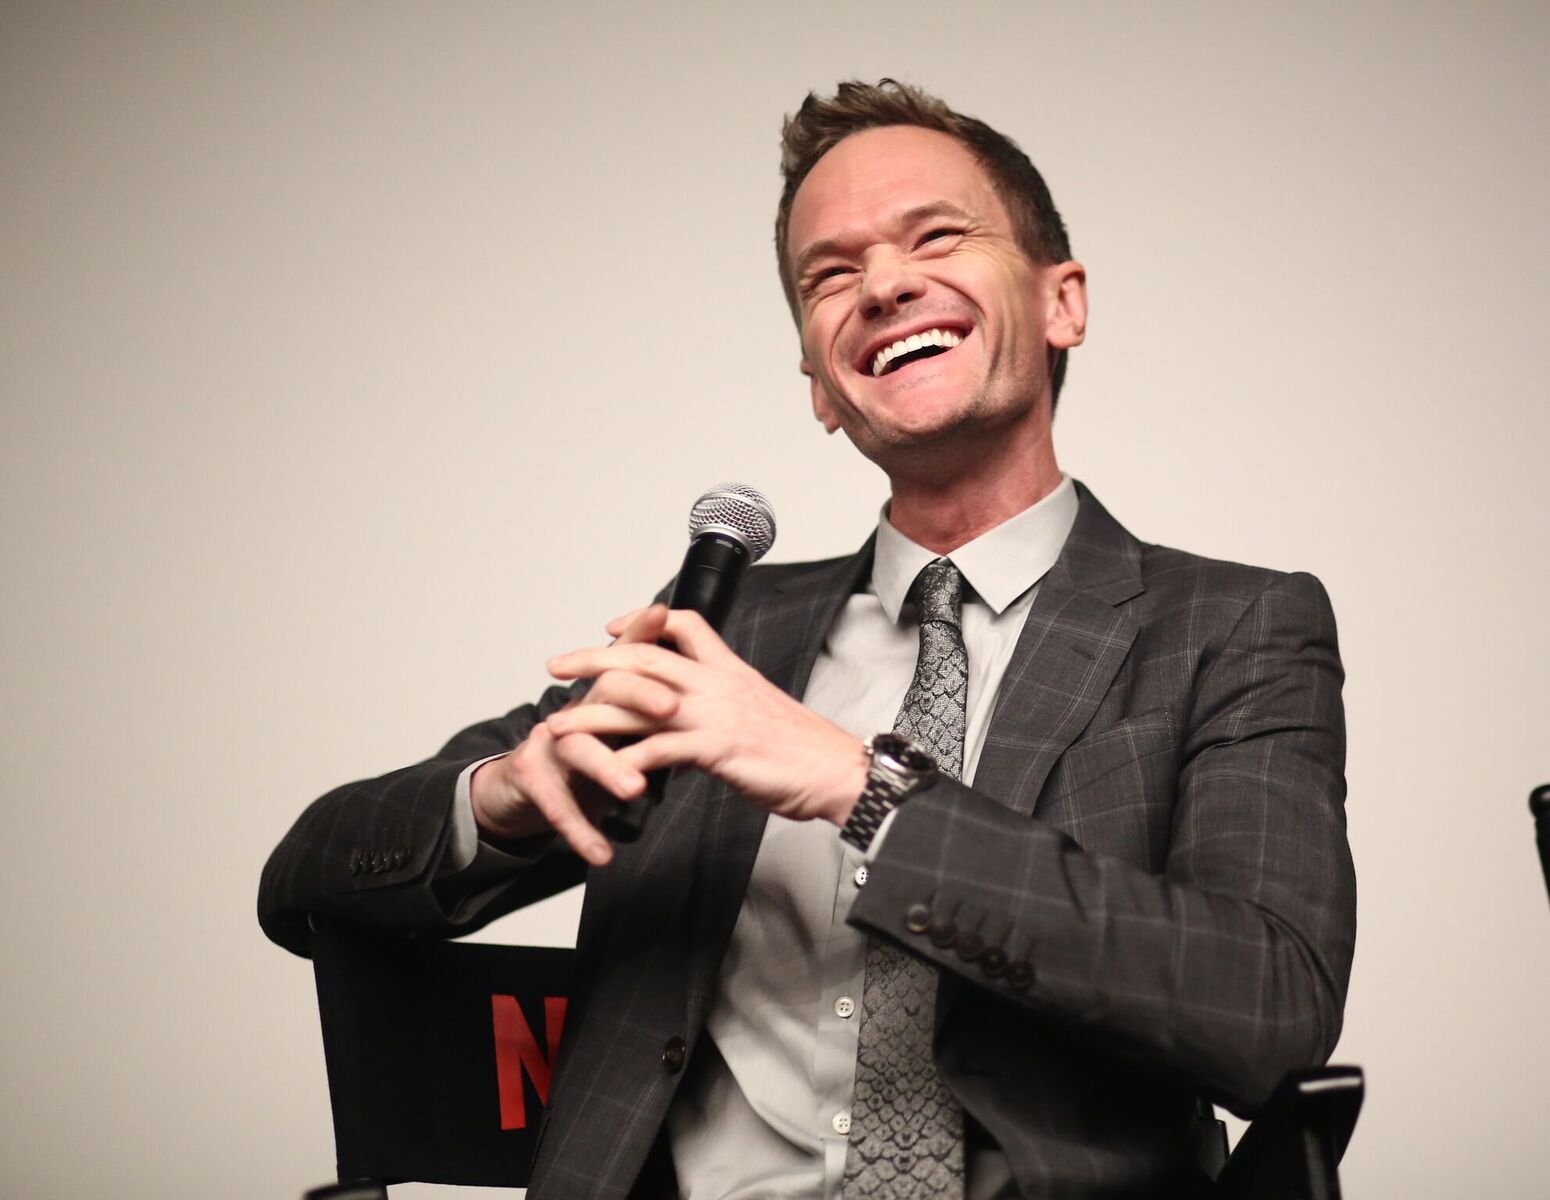 Neil Patrick Harris at Netflix's "A Series of Unfortunate Events" Red Carpet and Reception in 2019 in Los Angeles | Source: Getty Images